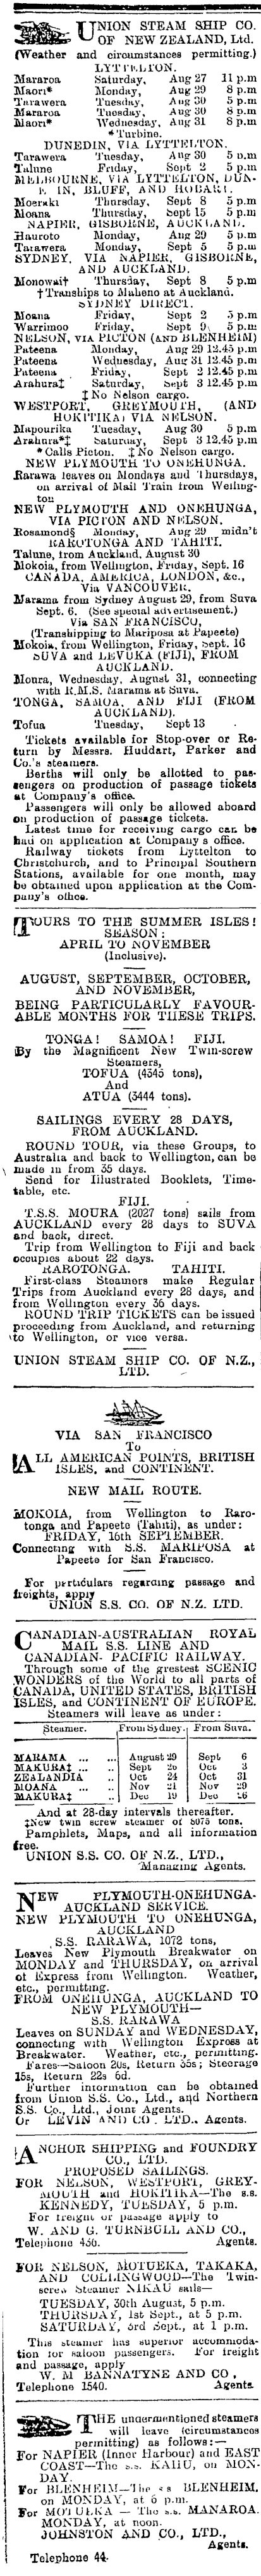 Papers Past Newspapers Evening Post 27 August 1910 Page 3 Advertisements Column 1